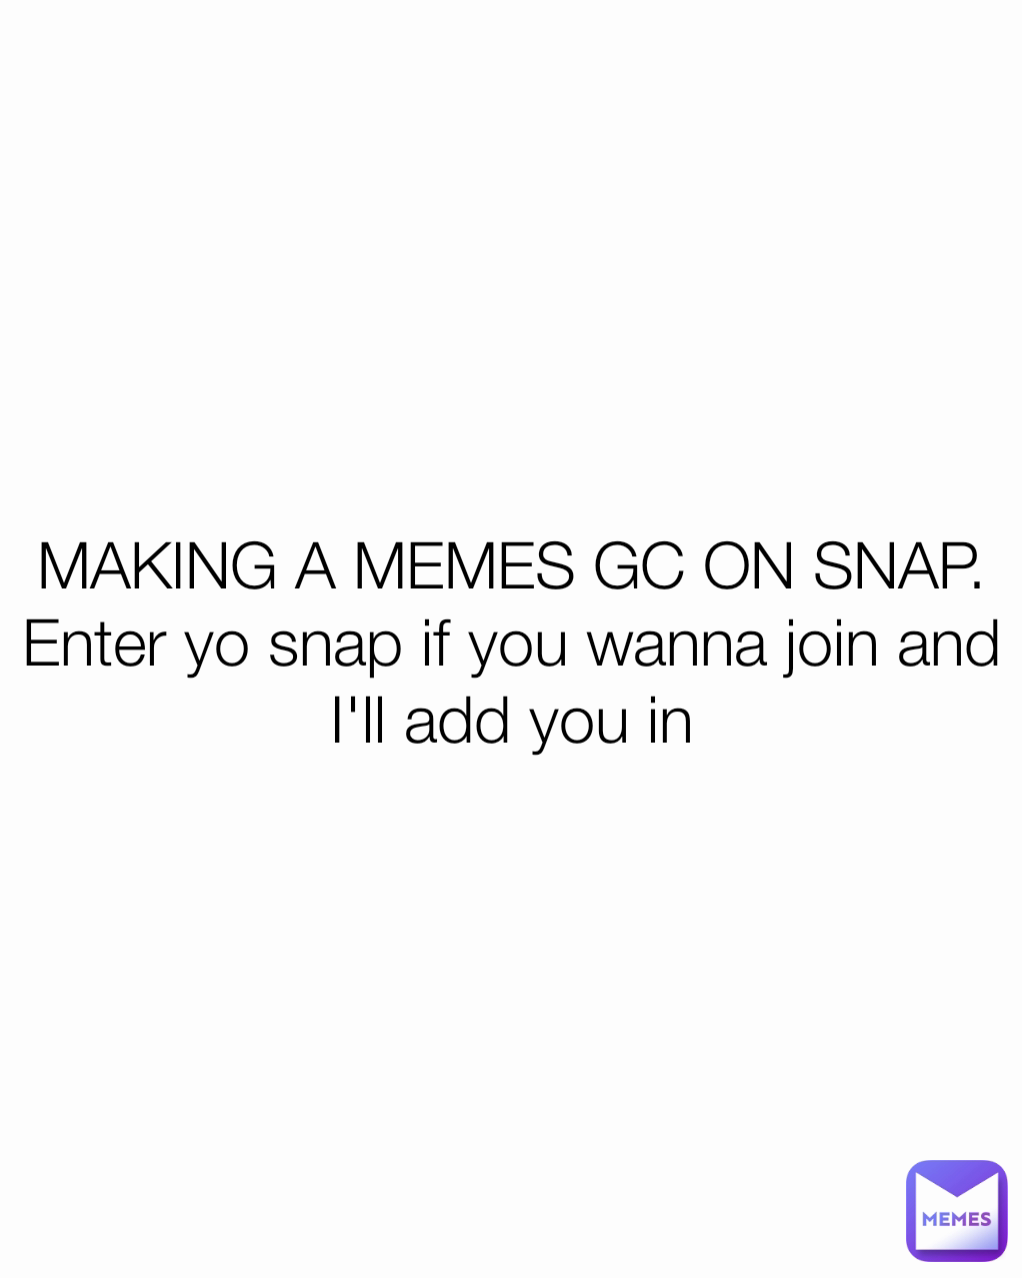 MAKING A MEMES GC ON SNAP. Enter yo snap if you wanna join and I'll add you in